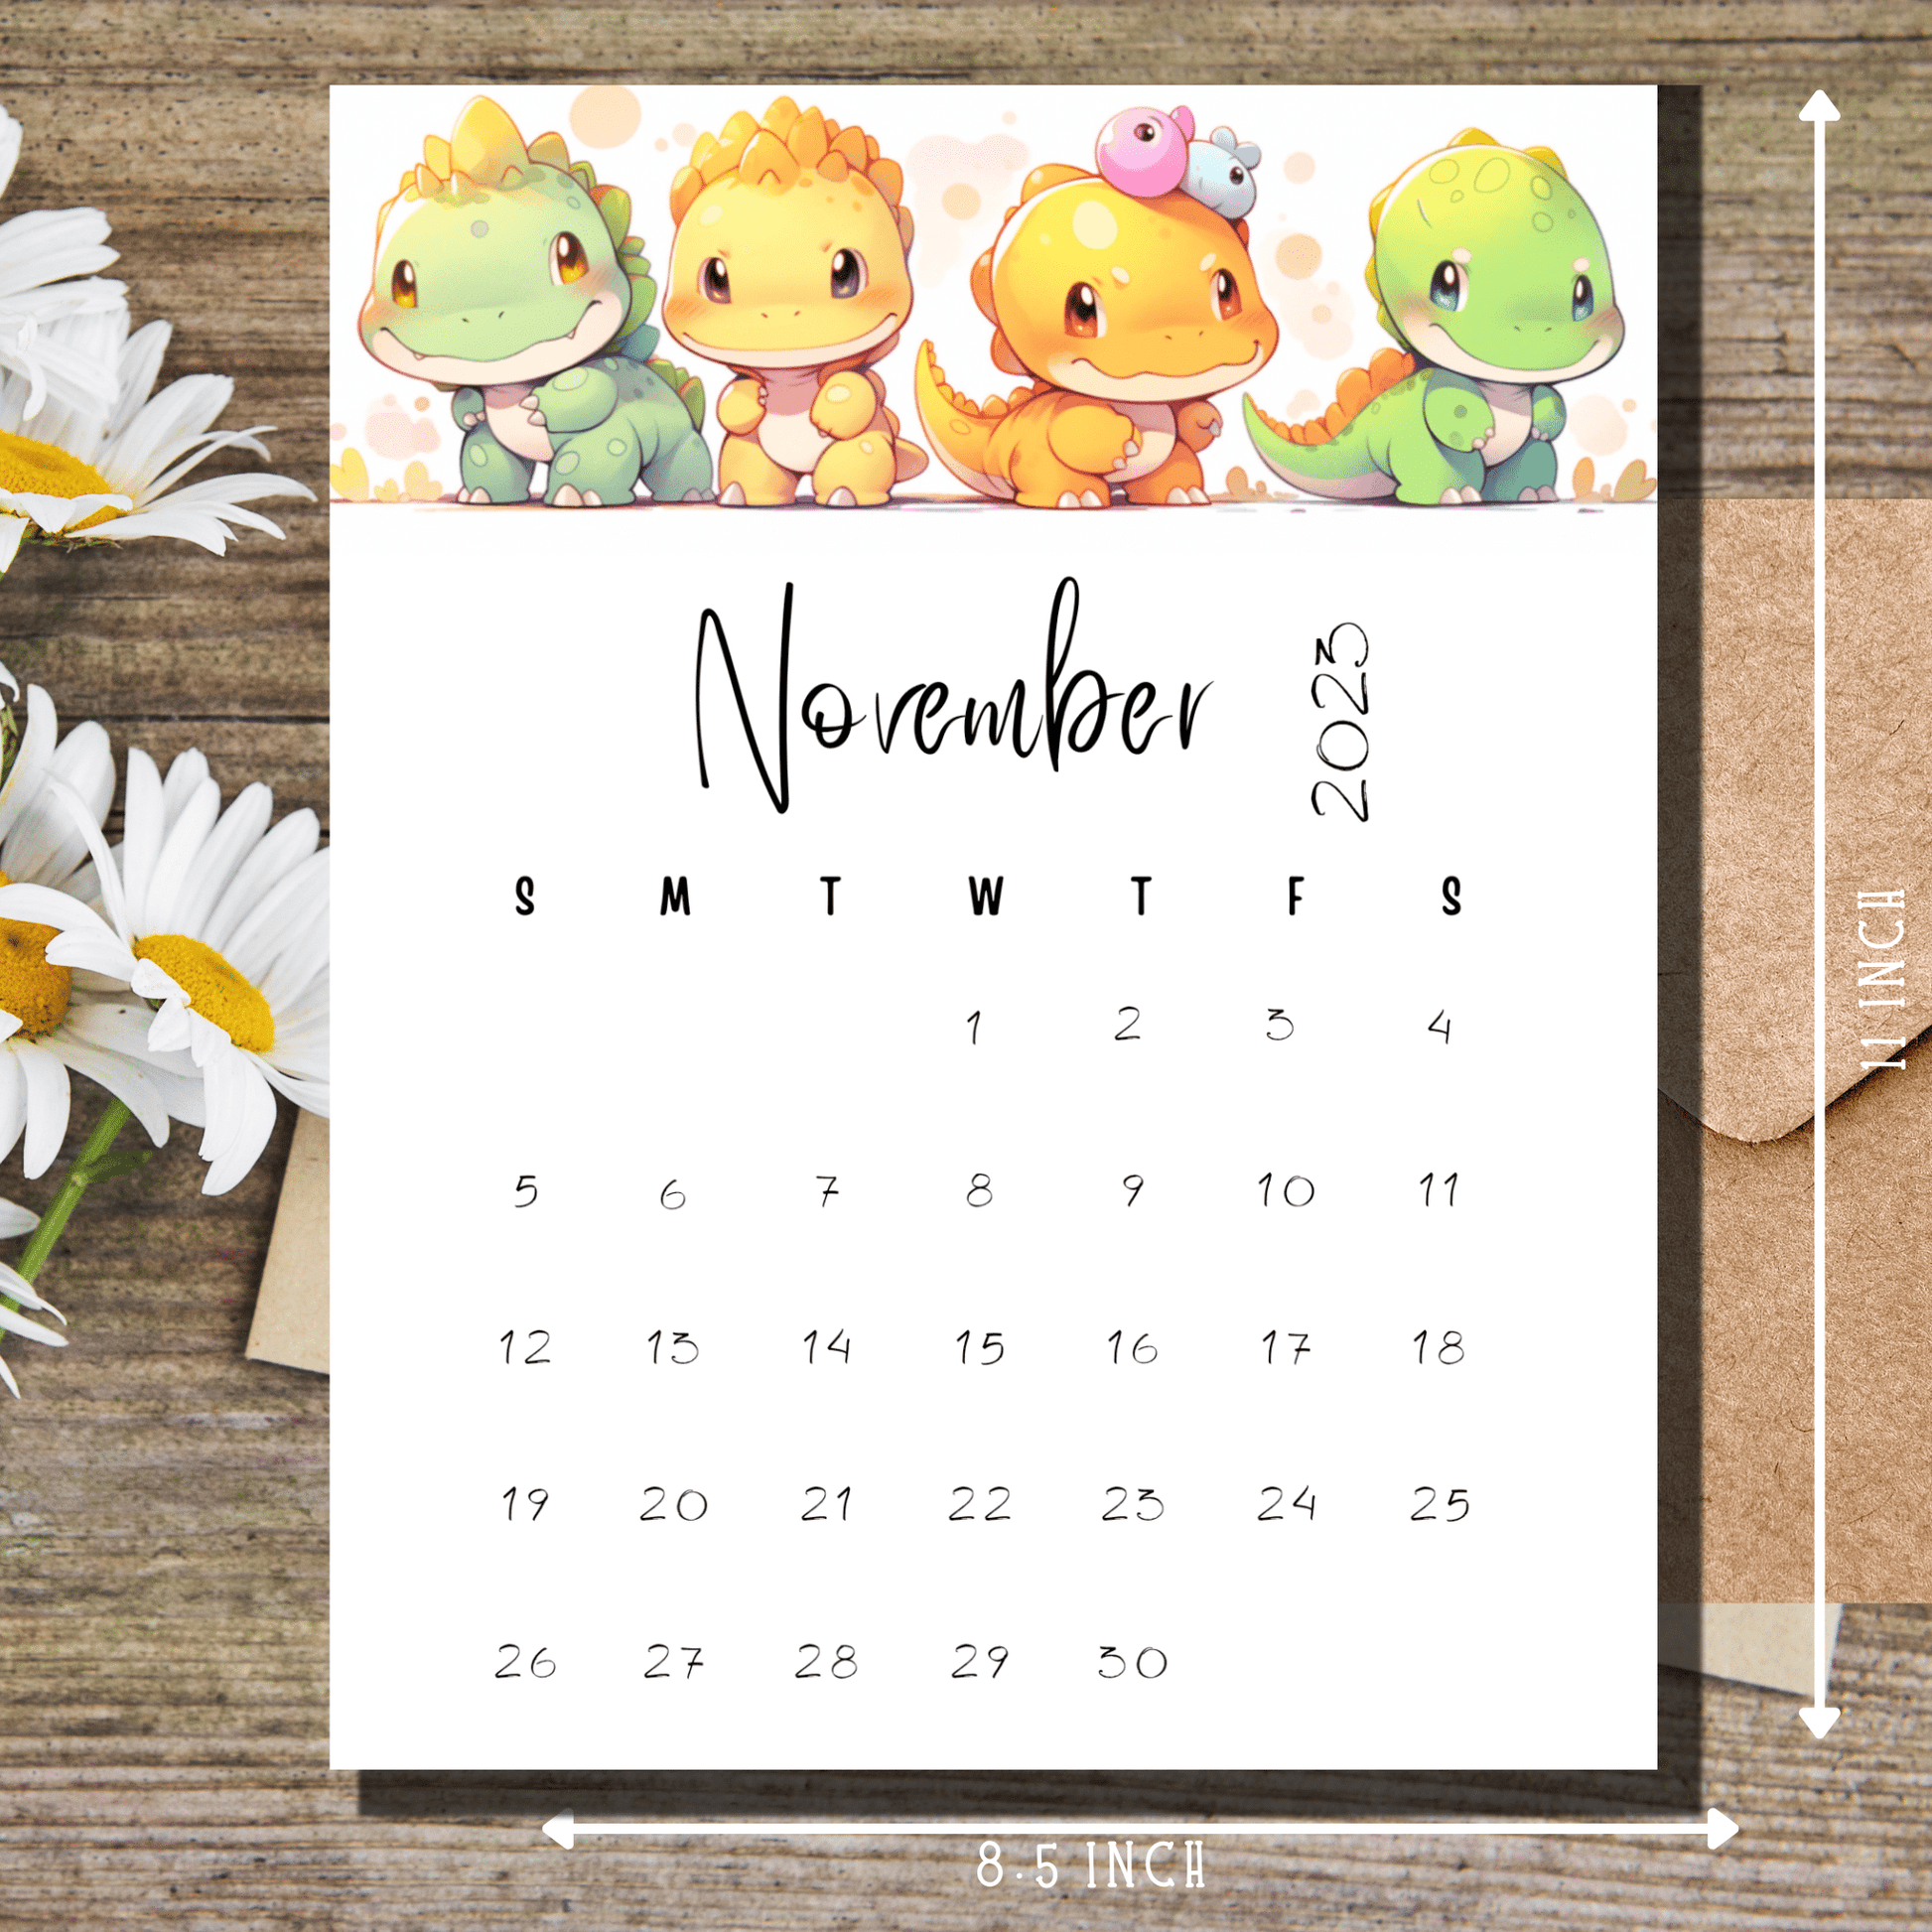 Printable November 2023 calendar in A4 and 8.5x11 inch sizes, decorated with adorable dinosaurs to make planning fun for children.